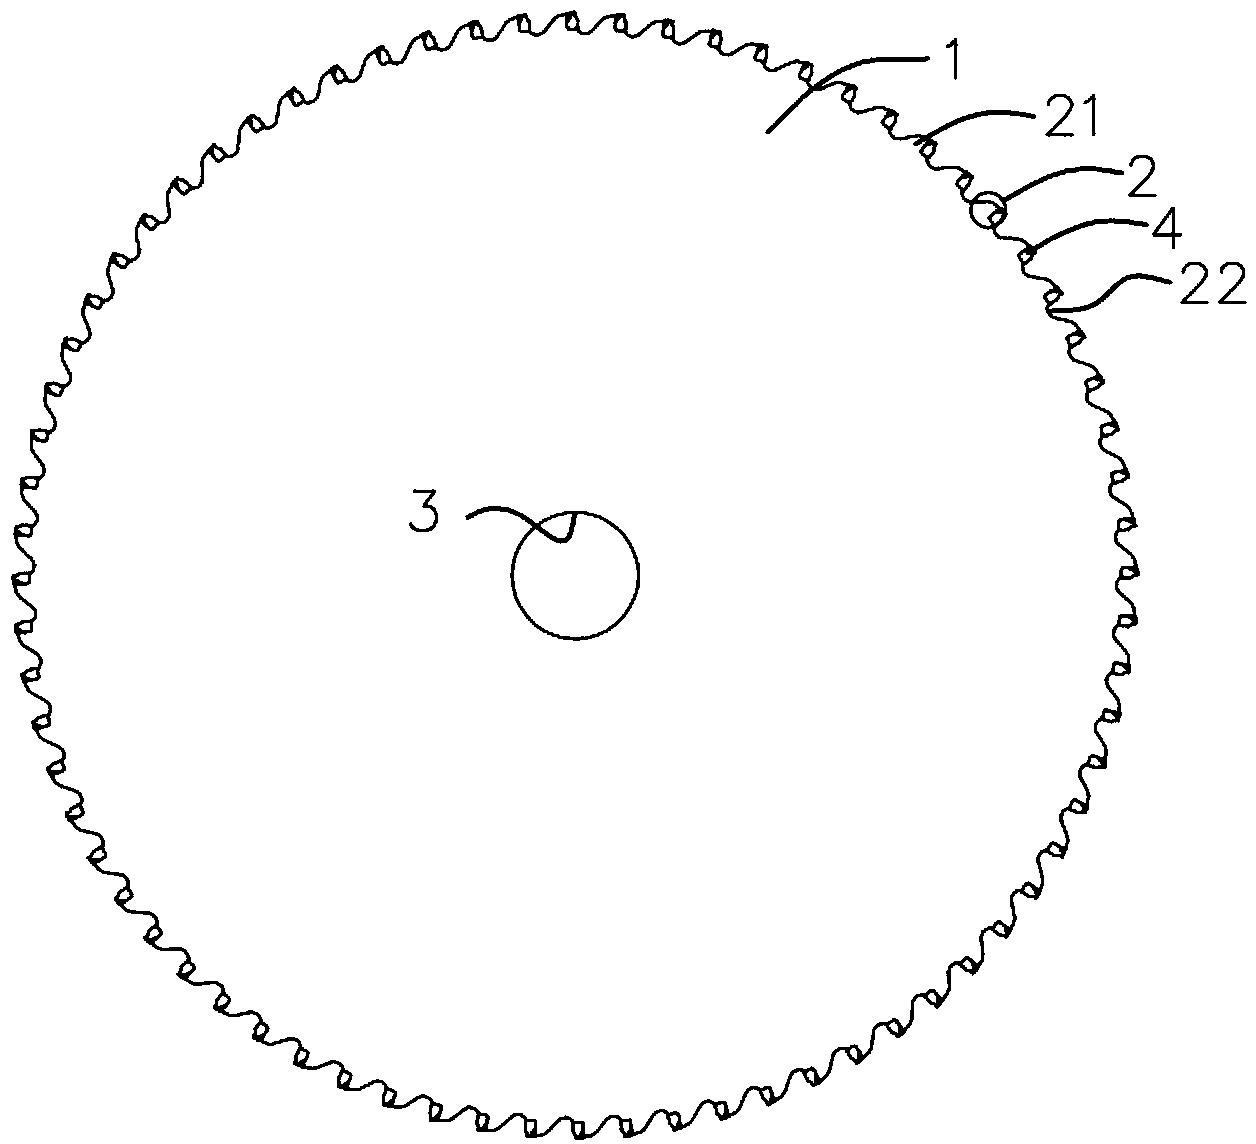 Method for preparing stainless steel cutting cold saw and saw blade of cold saw